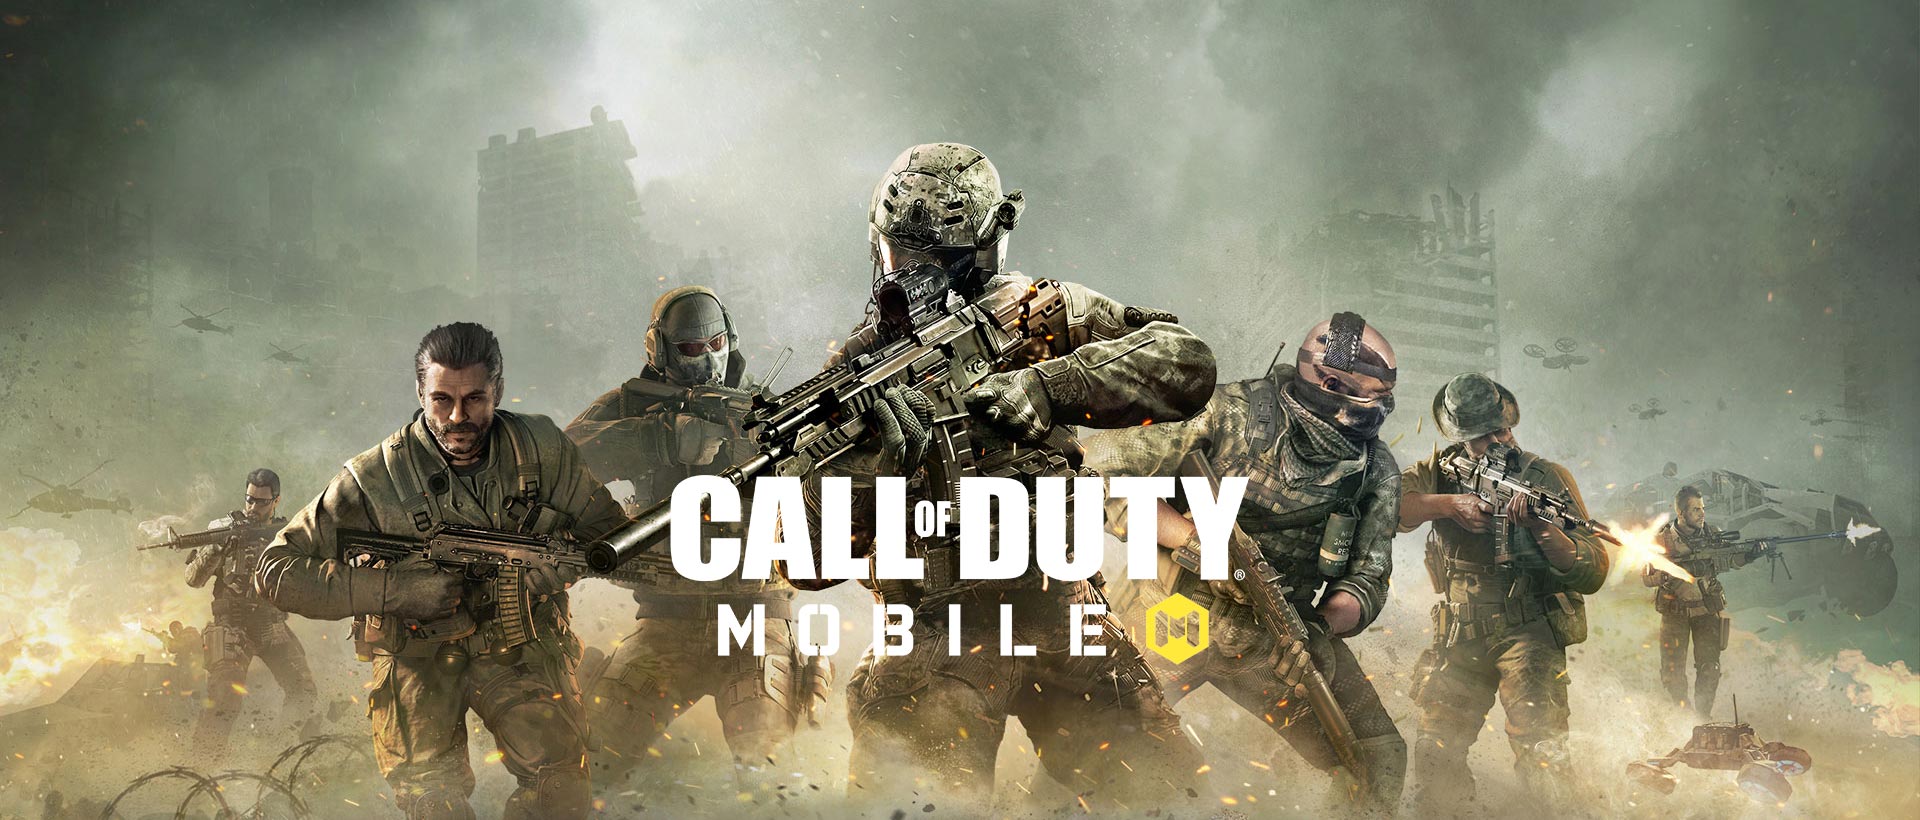 Download & Play Call of Duty Mobile Season 7 on PC & Mac with NoxPlayer (Emulator)